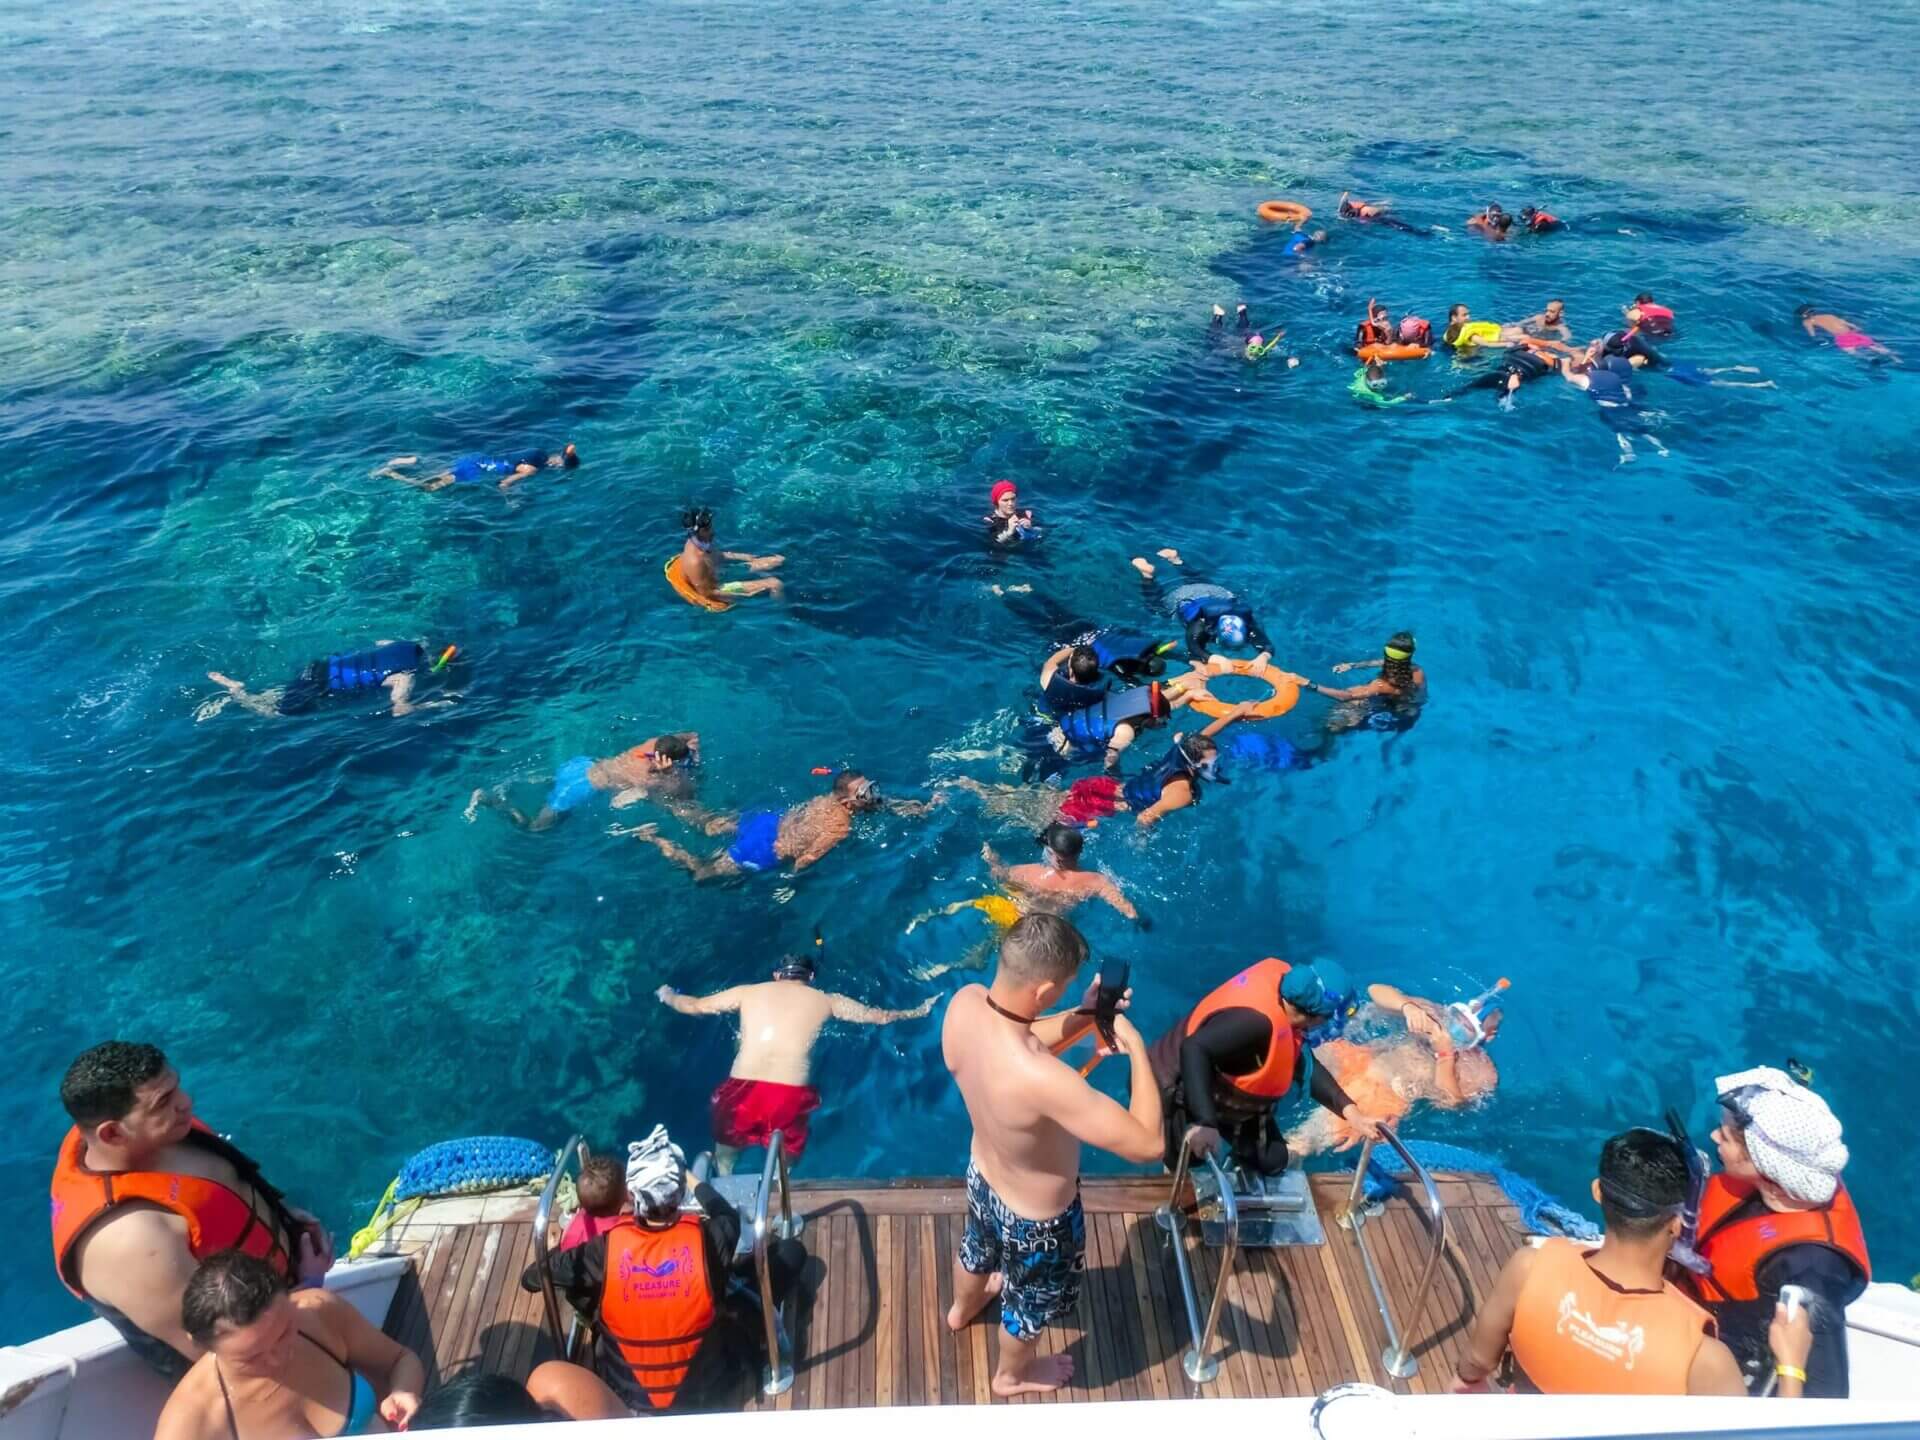 sharm-el-sheikh-egypt-september-10-2020-a-group-of-tourists-swims-in-the-red-sea-near-pleasure-boats-at-sharm-el-sheikh-egypt-on-september-10-2020-snorkeling-in-the-open-sea-people-snorkel-swim-near-t-stockpack-istock